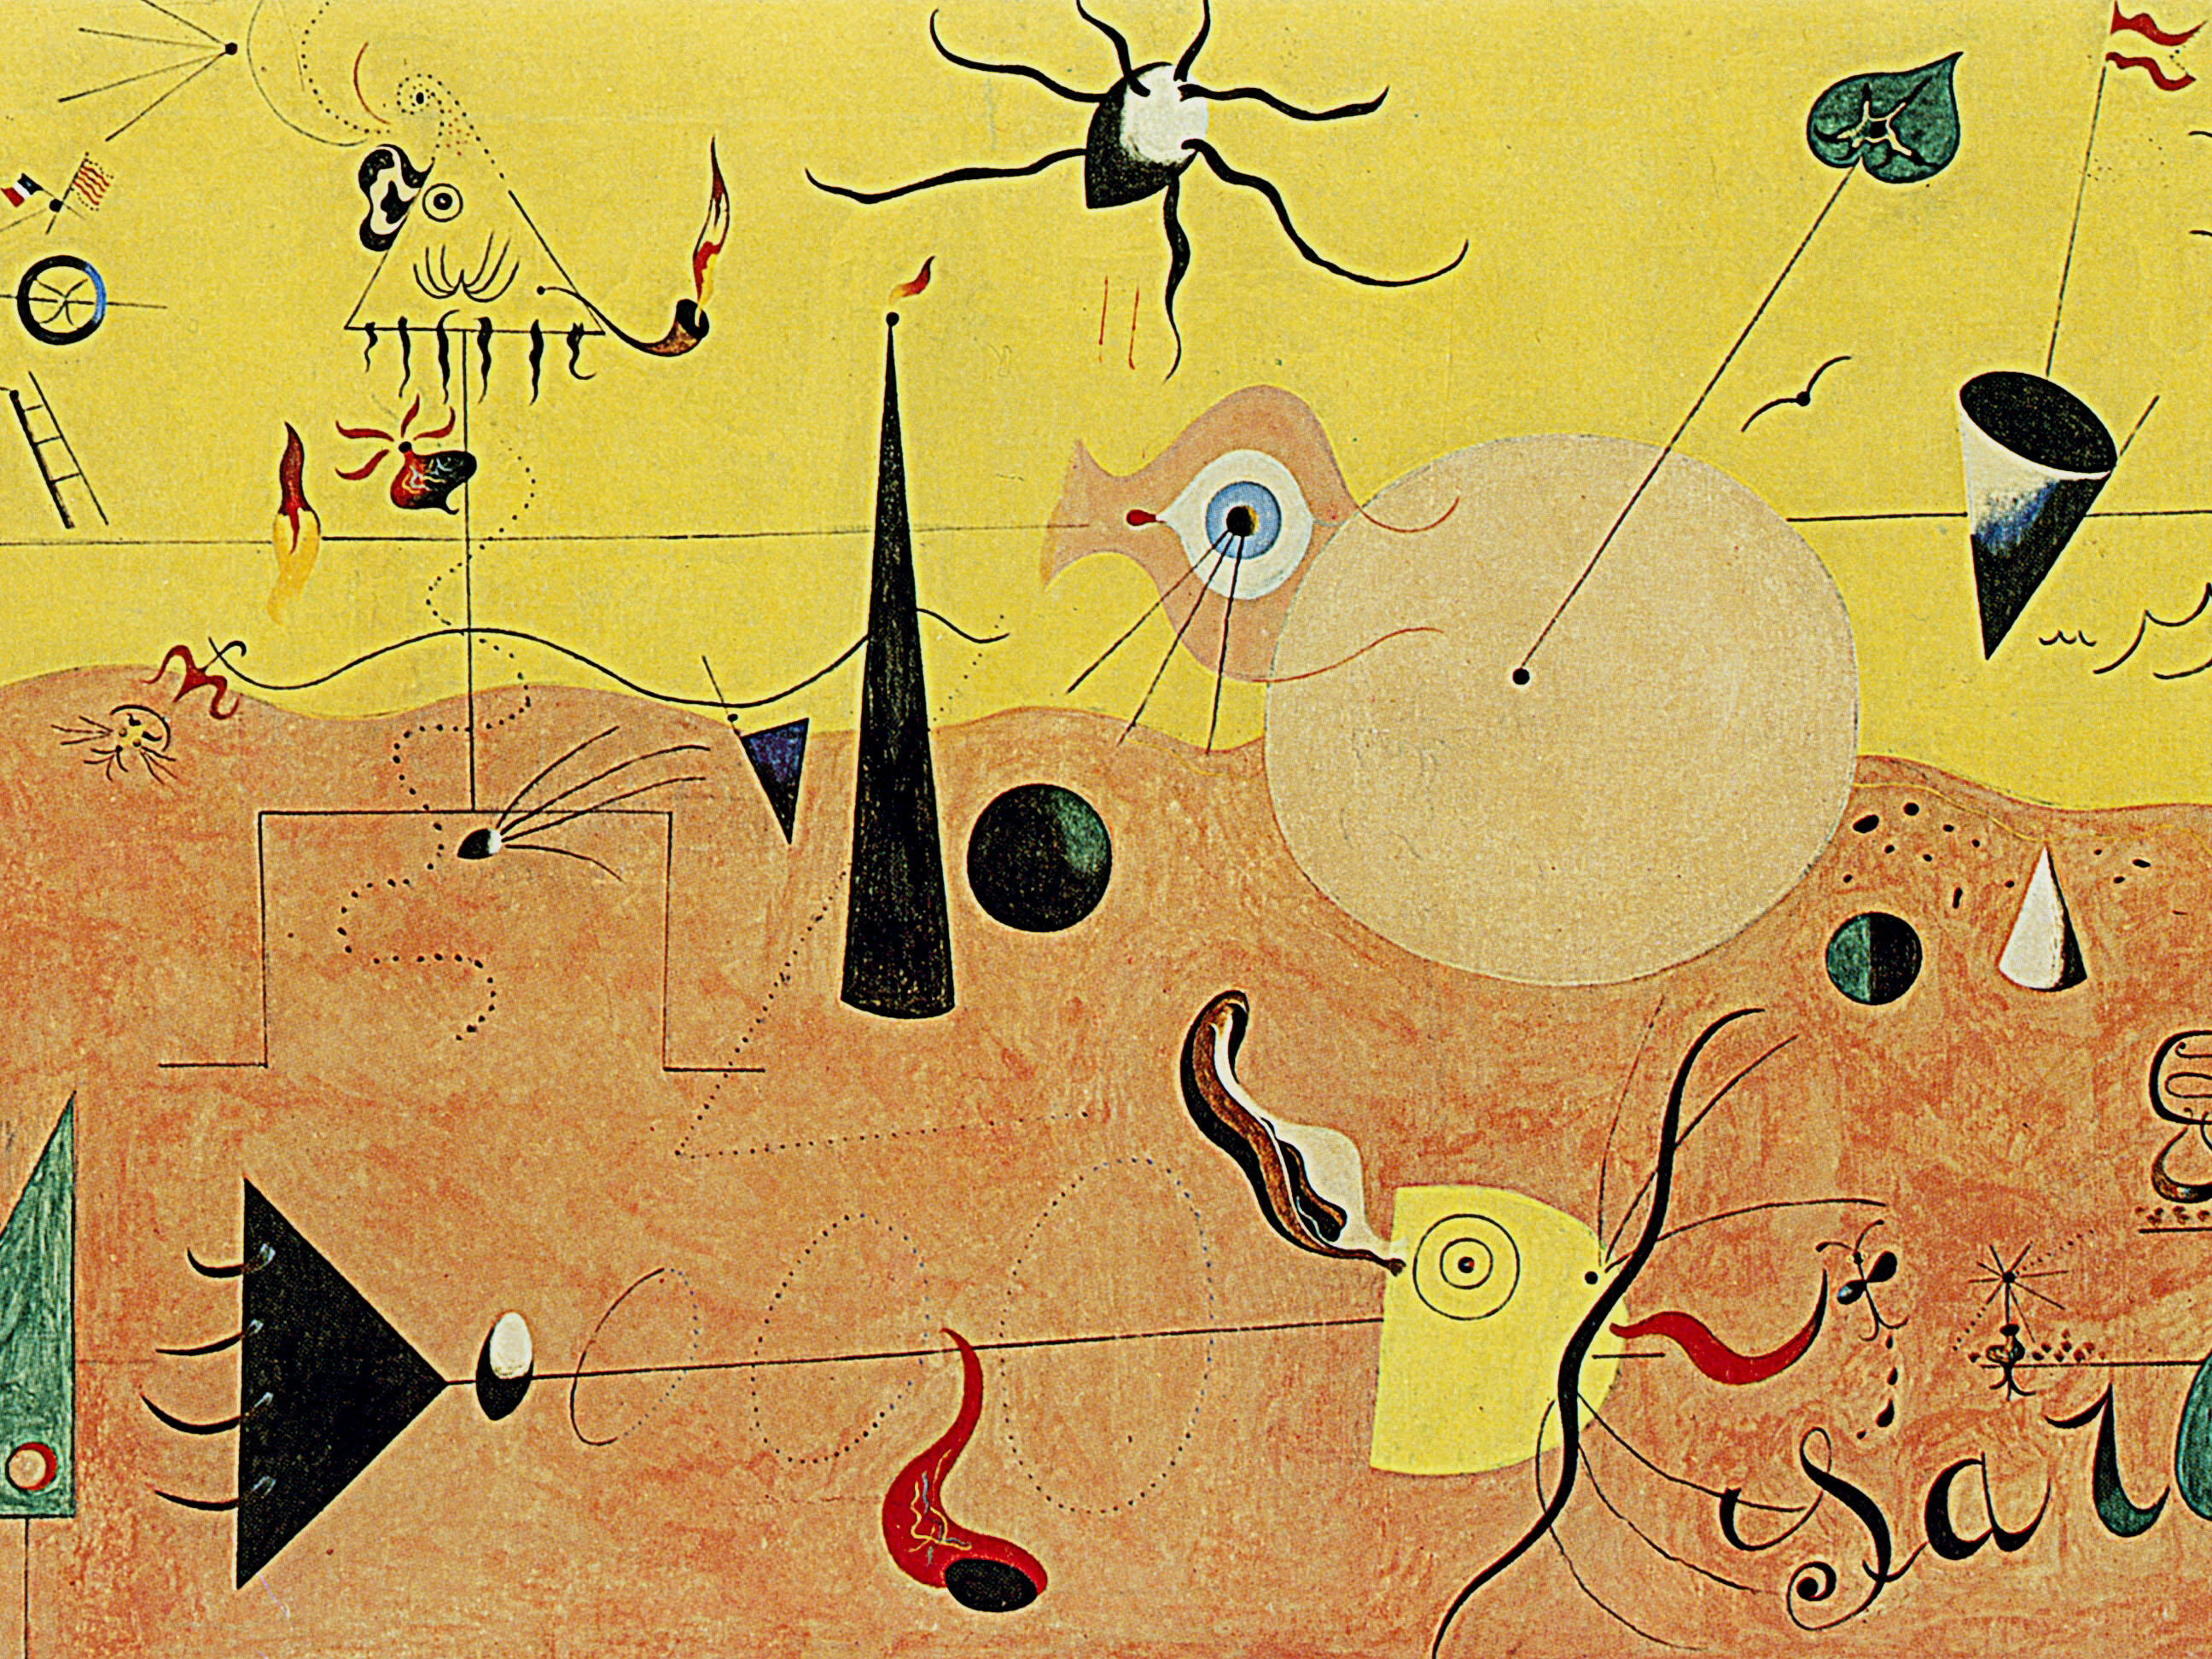 surreal painting by Miro